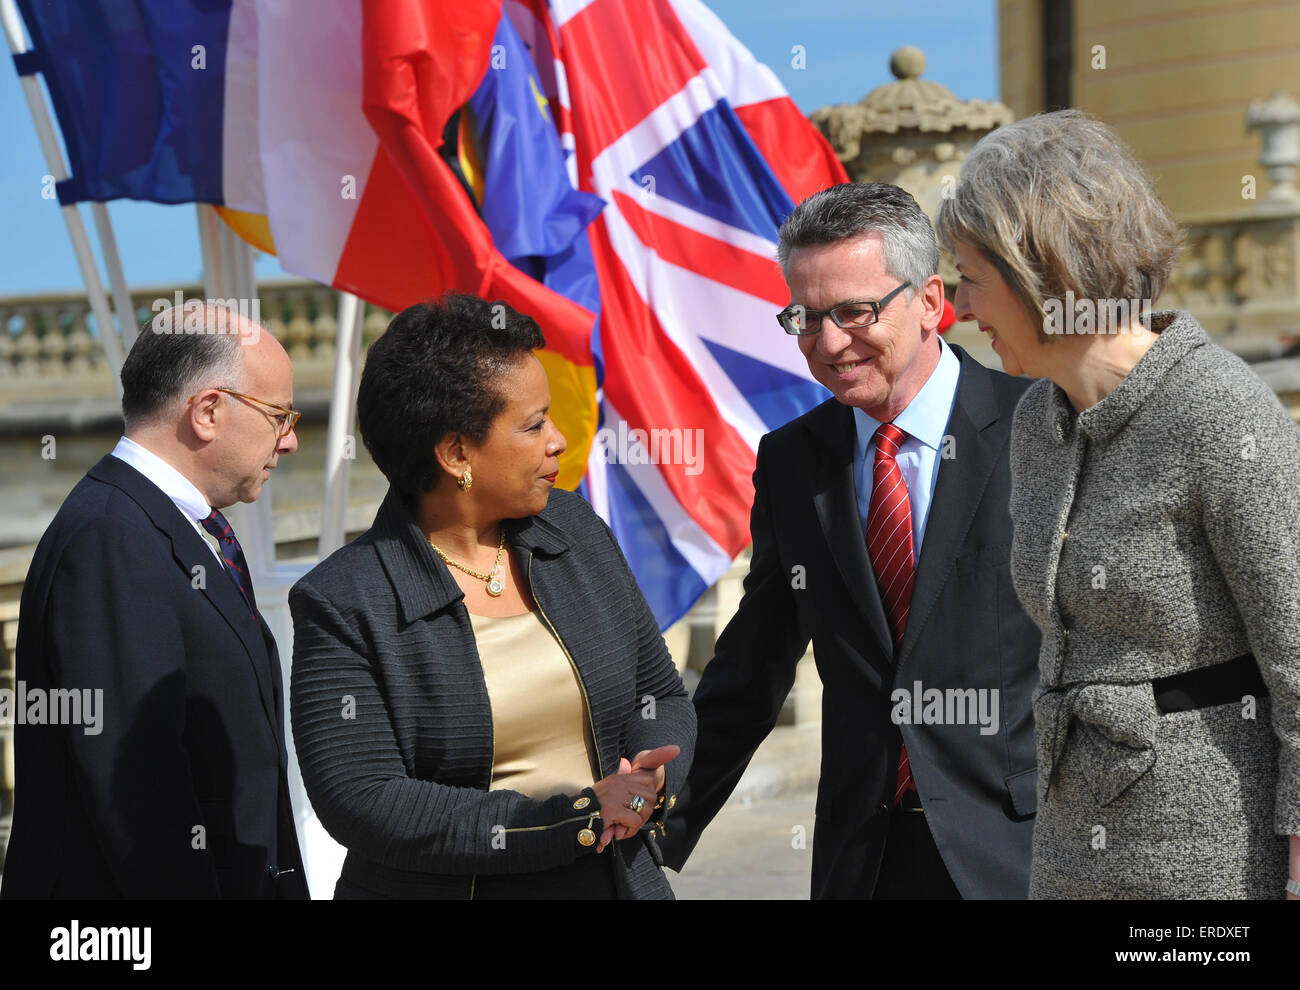 Moritzburg, Germany. 2nd June, 2015. German Interior Minister Thomas de Maiziere (2.v.R) stands next to US Attorney General Loretta Lynch (2.v.L), French Interior Minister Bernard Cazeneuve (L) and the British Interior Minister Theresa May (R) at the G6 Meeting of Interior Ministers at Moritzburg Castle. The German Interior Minister de Maiziere meets with his counterparts from France, Italy, Poland, Spain, and the UK (G6), as well as the EU Commissioner, on 01 and 02 June for political briefing at the Castle near Dresen. Credit:  dpa picture alliance/Alamy Live News Stock Photo